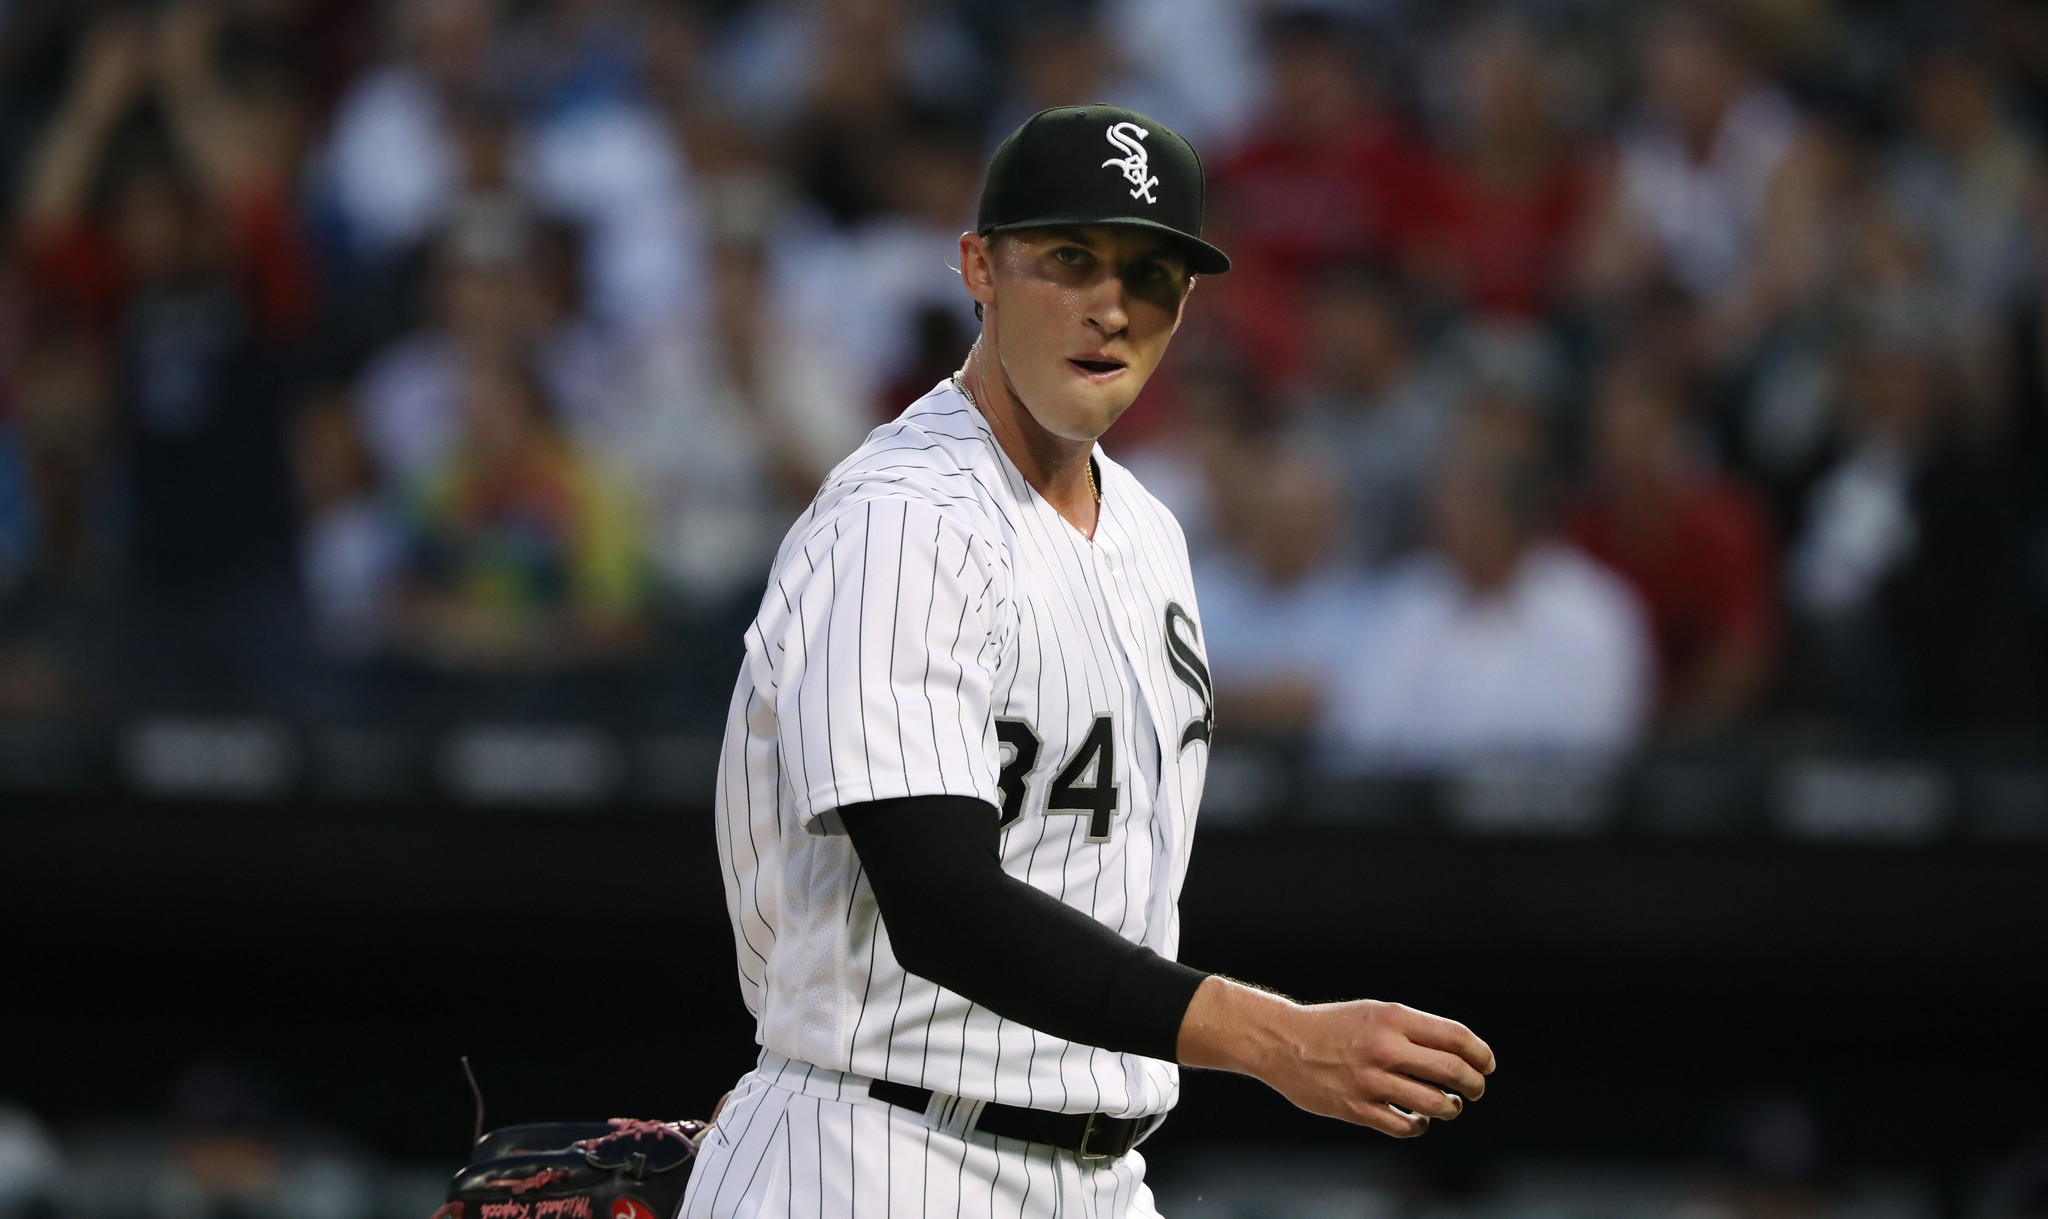 Charlotte Knights: When will Michael Kopech go to White Sox